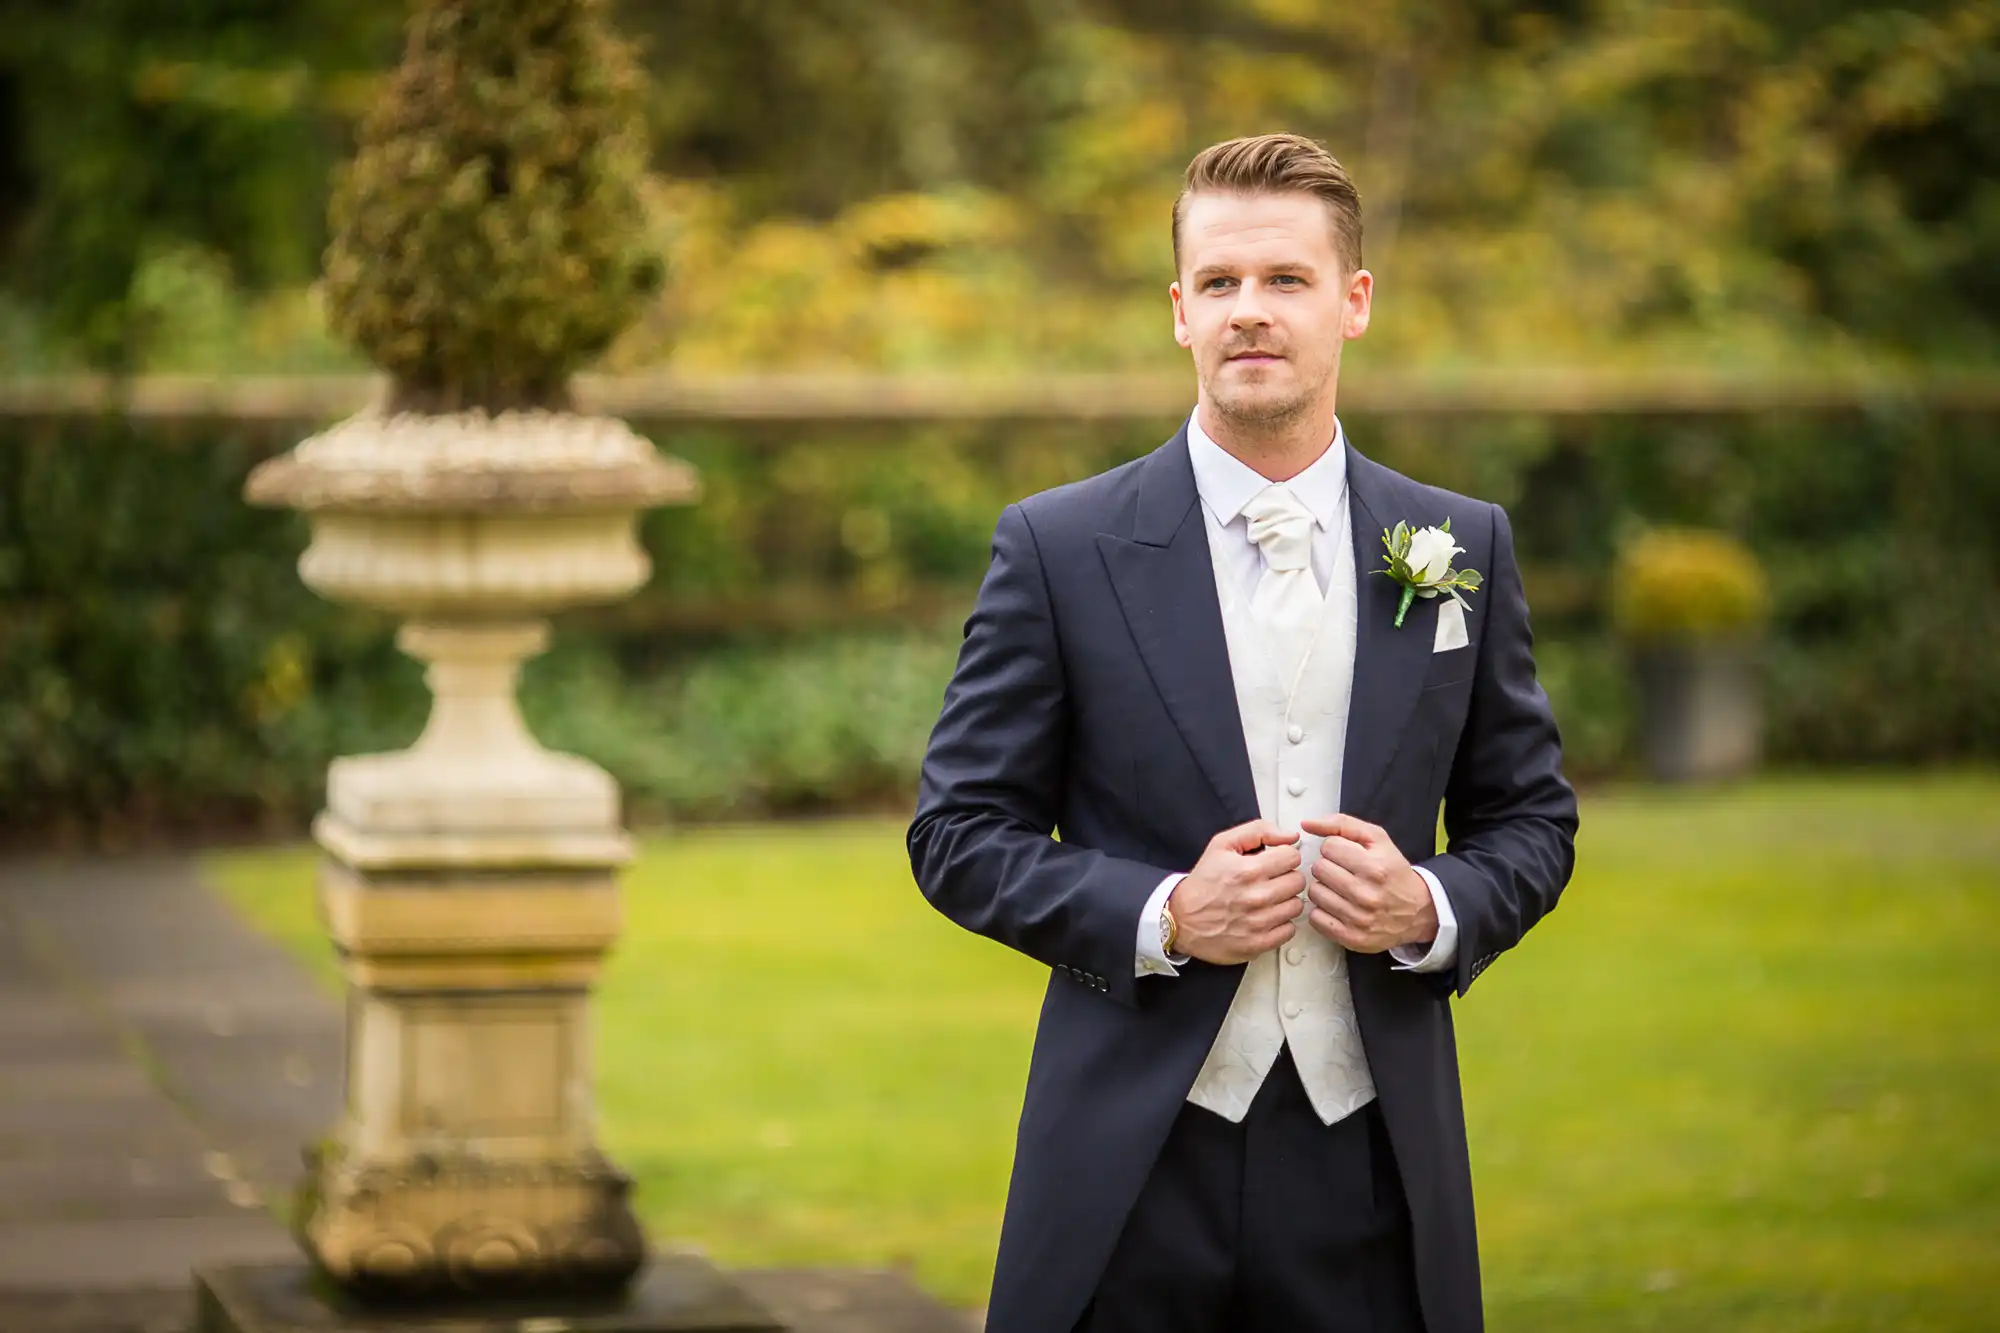 A groom dressed in a formal suit with a boutonniere stands confidently in a garden.